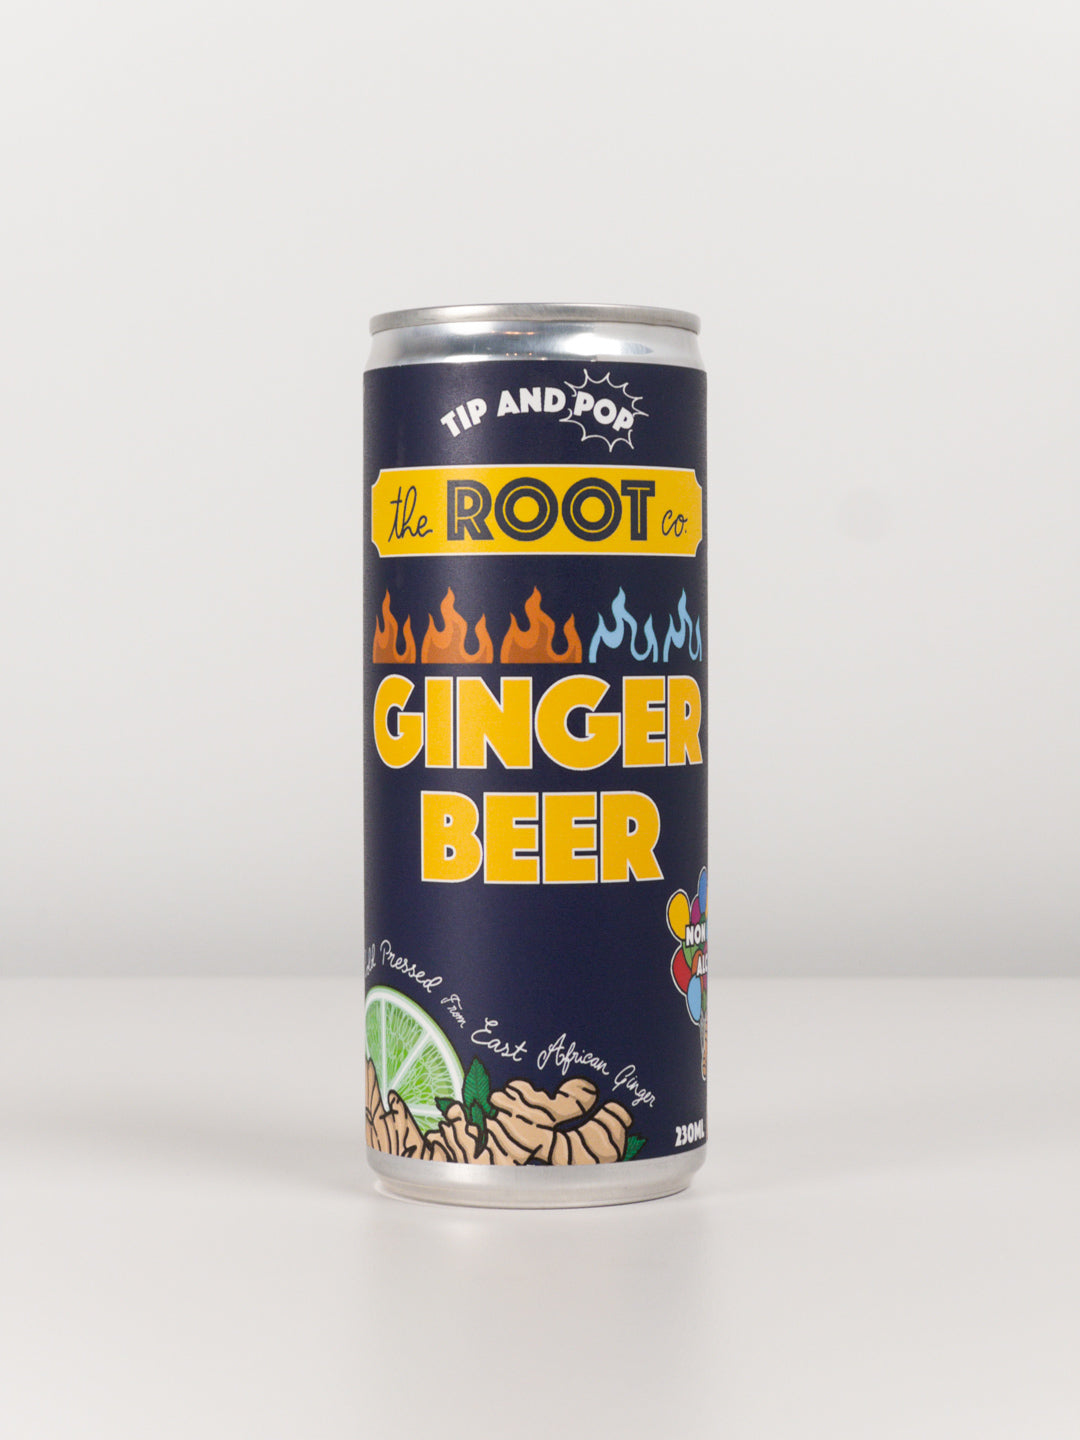 The Root- East African Root Ginger Beer